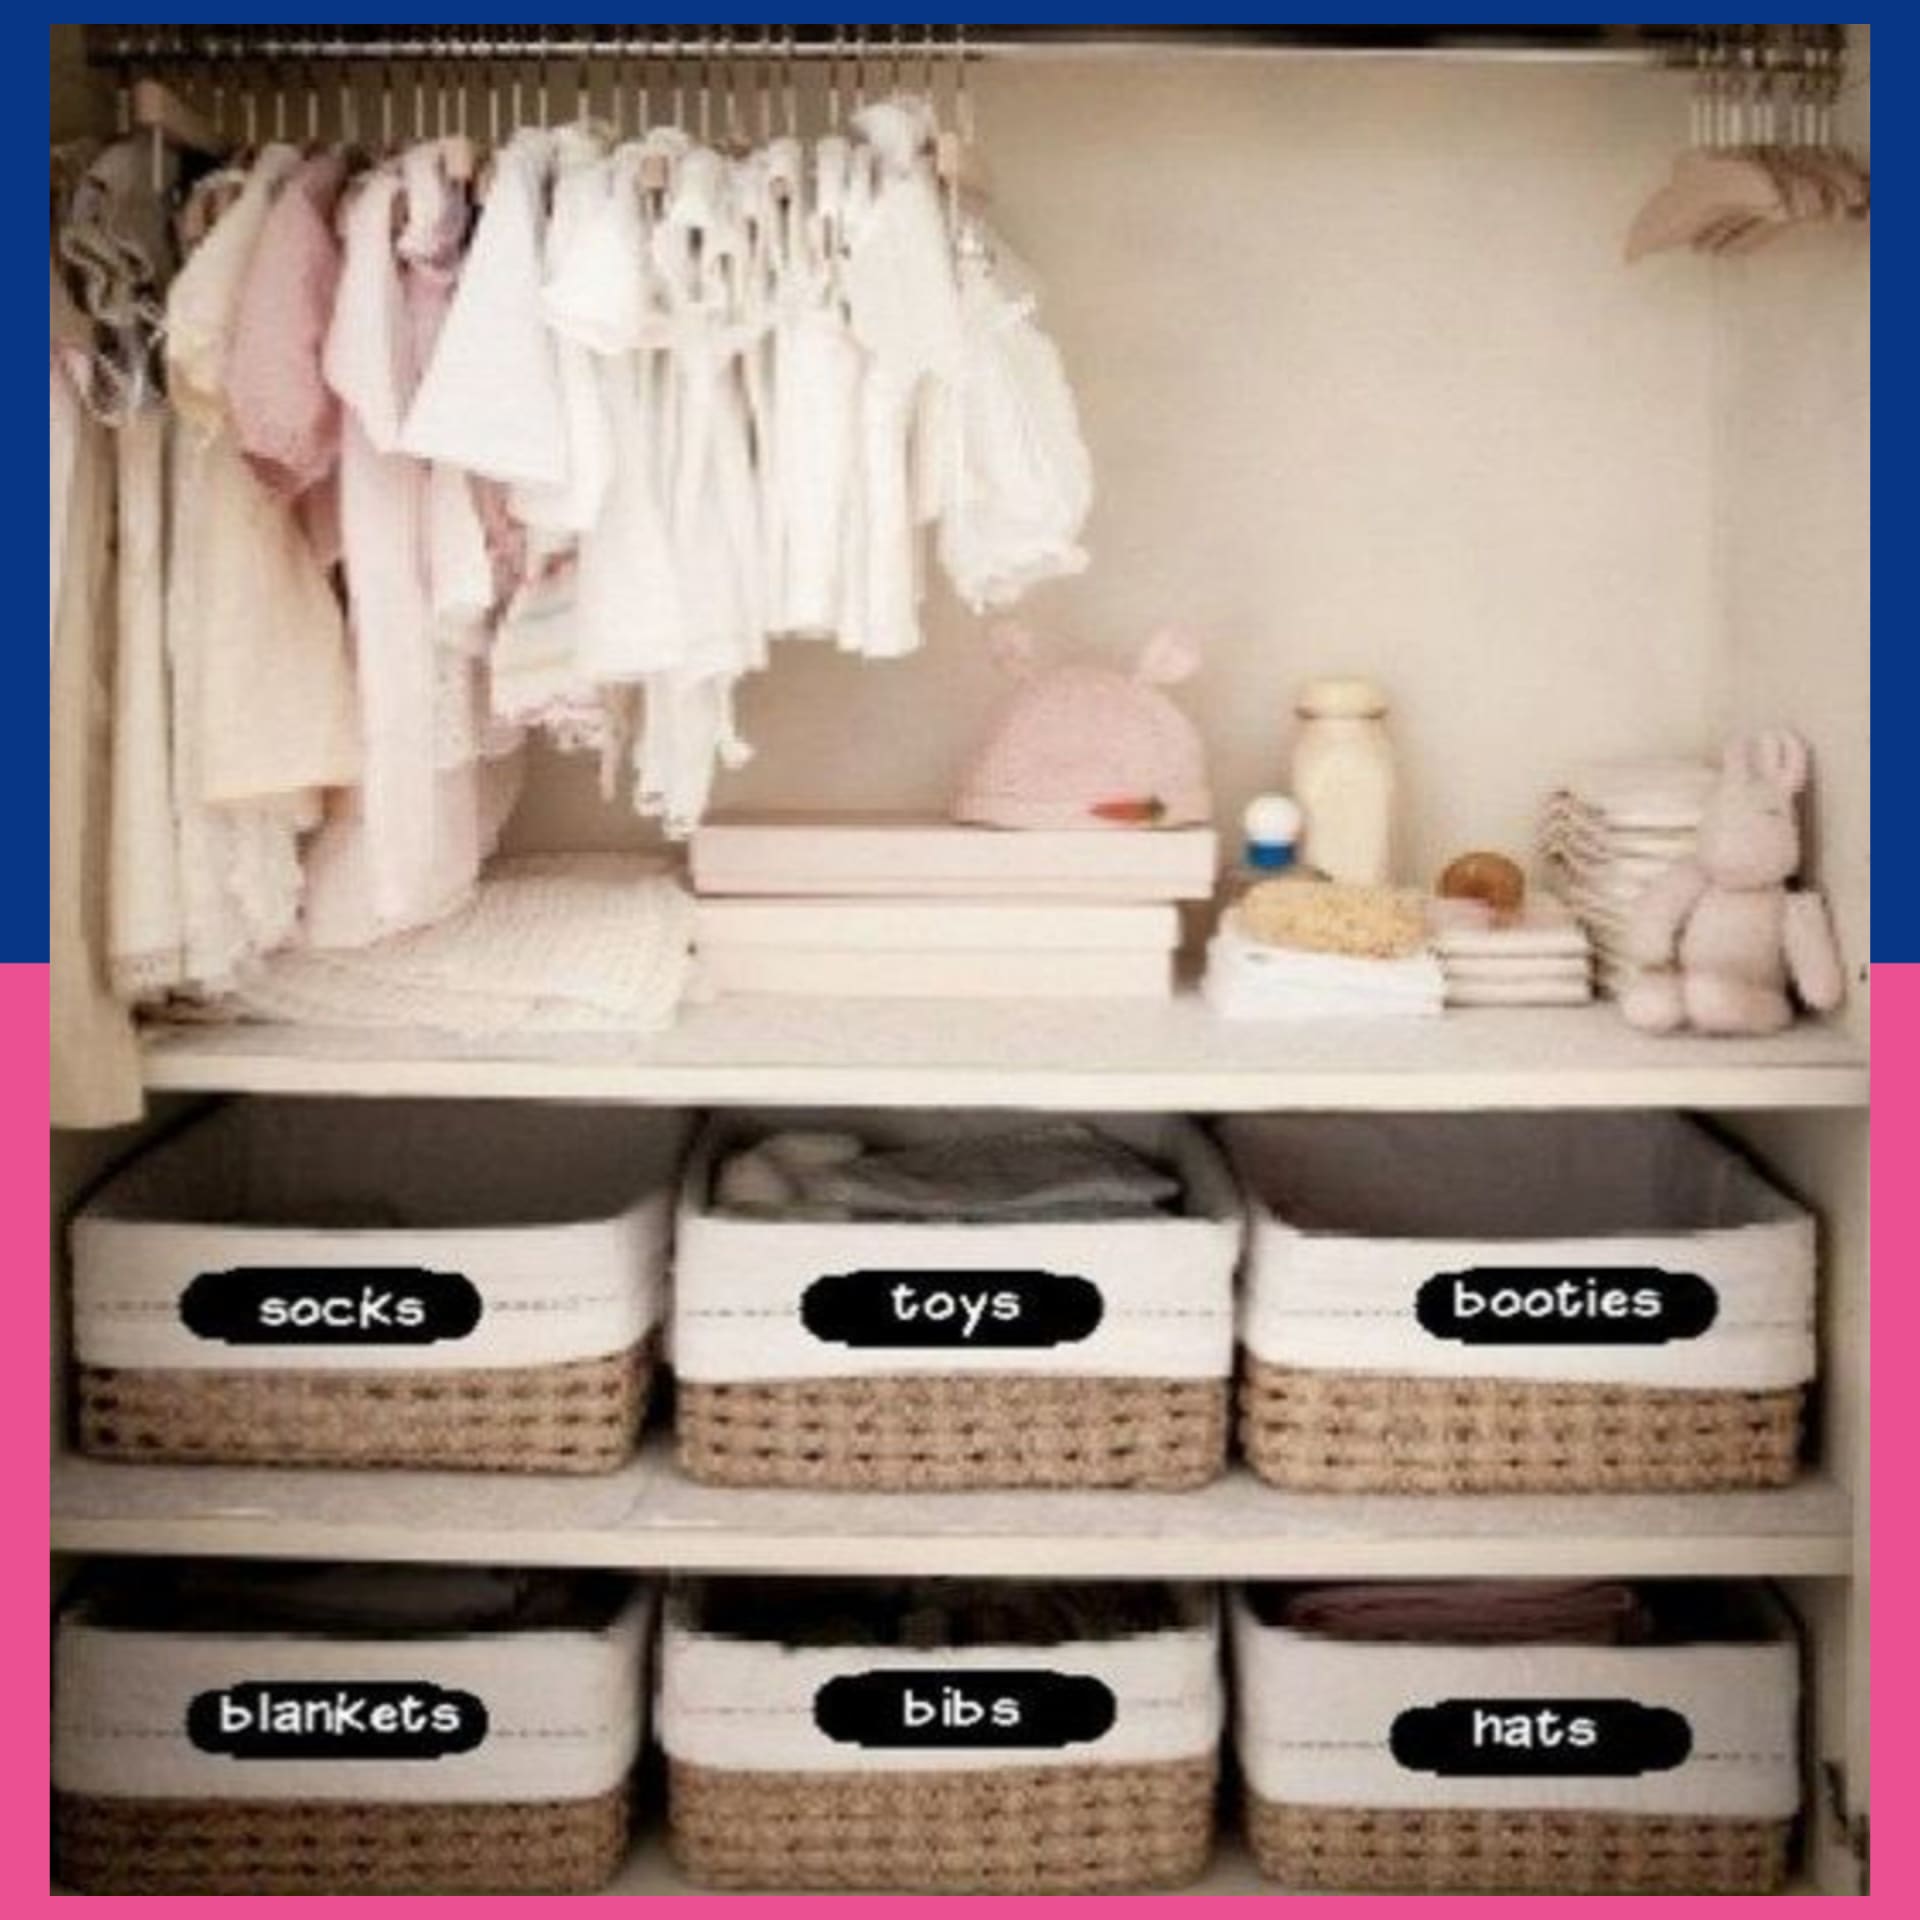 DIY organization ideas for the home - organizing with baskets in the baby closet - smart baby clothes organization dieas - nursery closet organization ideas for the home